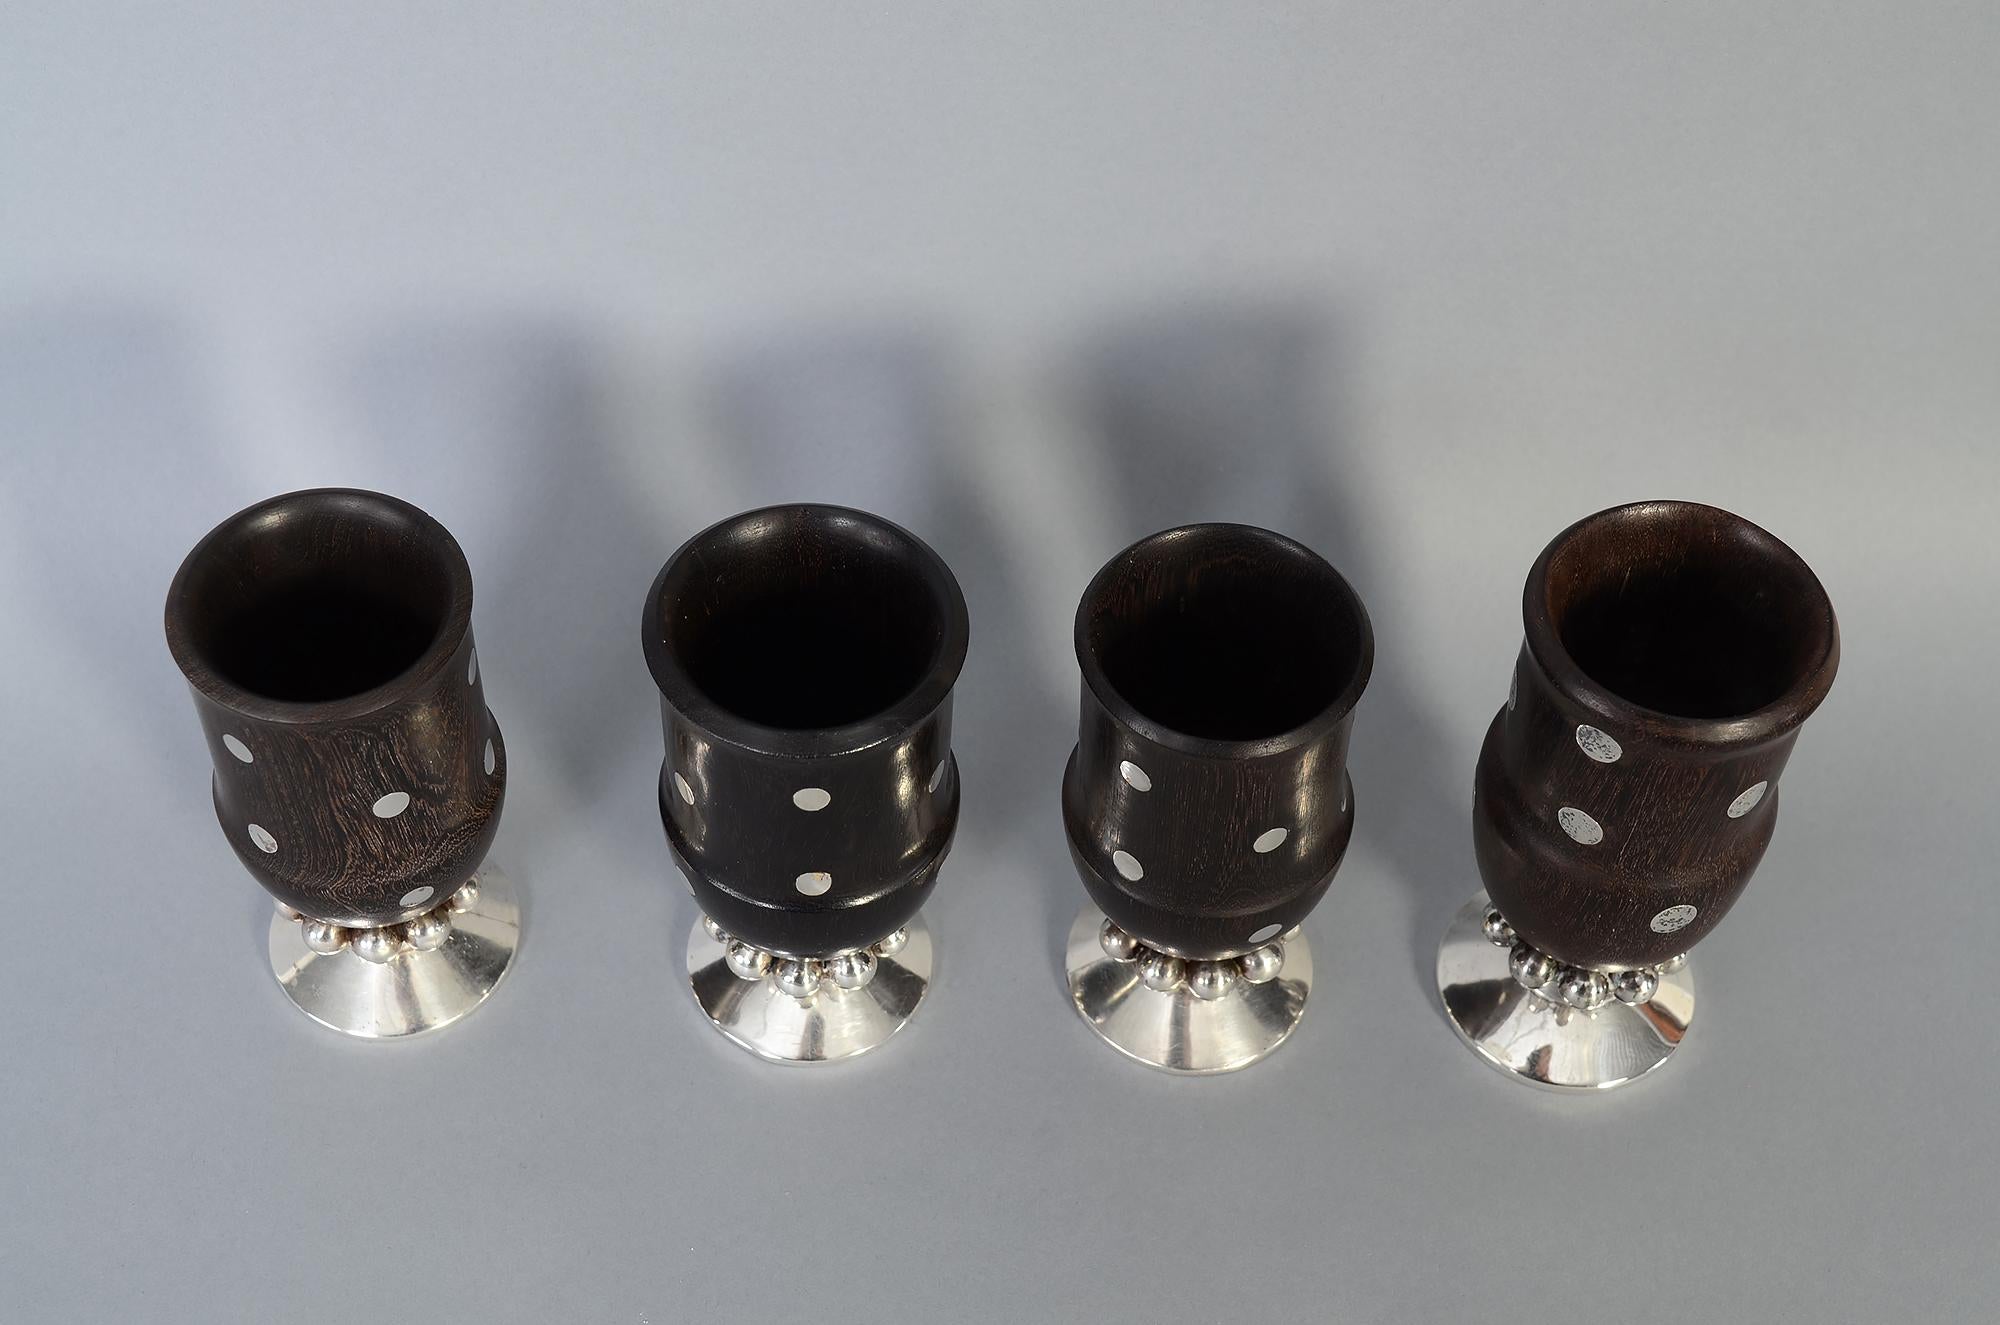 Beautiful assembled set of four ebony goblets with sterling dots by silver master, William Spratling. Three dimensional silver balls circle the stem of the goblets. Three of the goblets measure 4 1/2 inches tall. The fourth one is 4 13/16